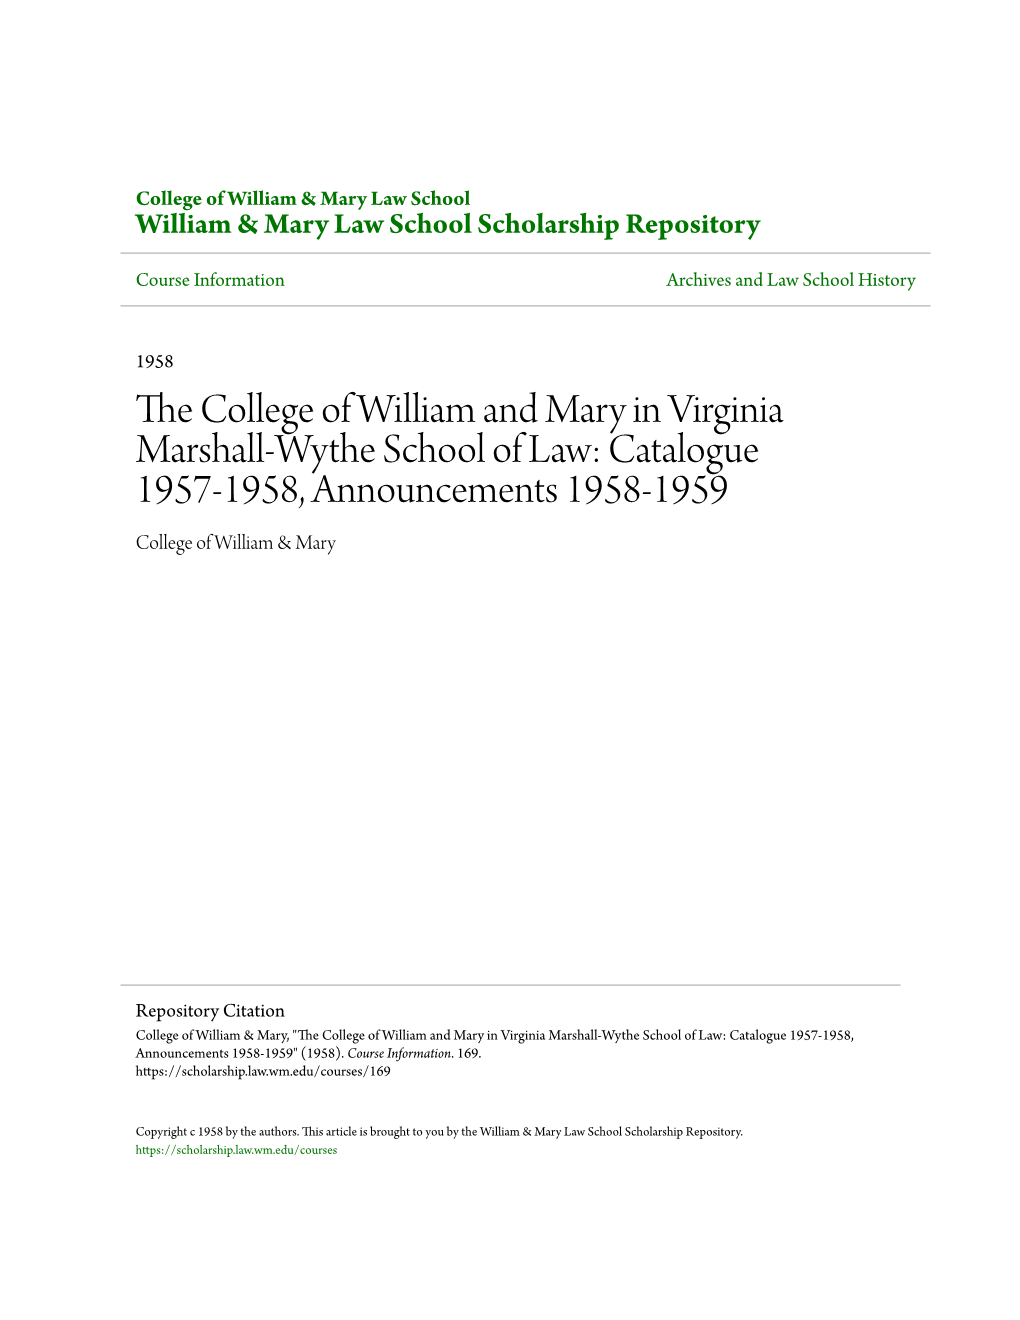 The College of William and Mary in Virginia Marshall-Wythe School Of